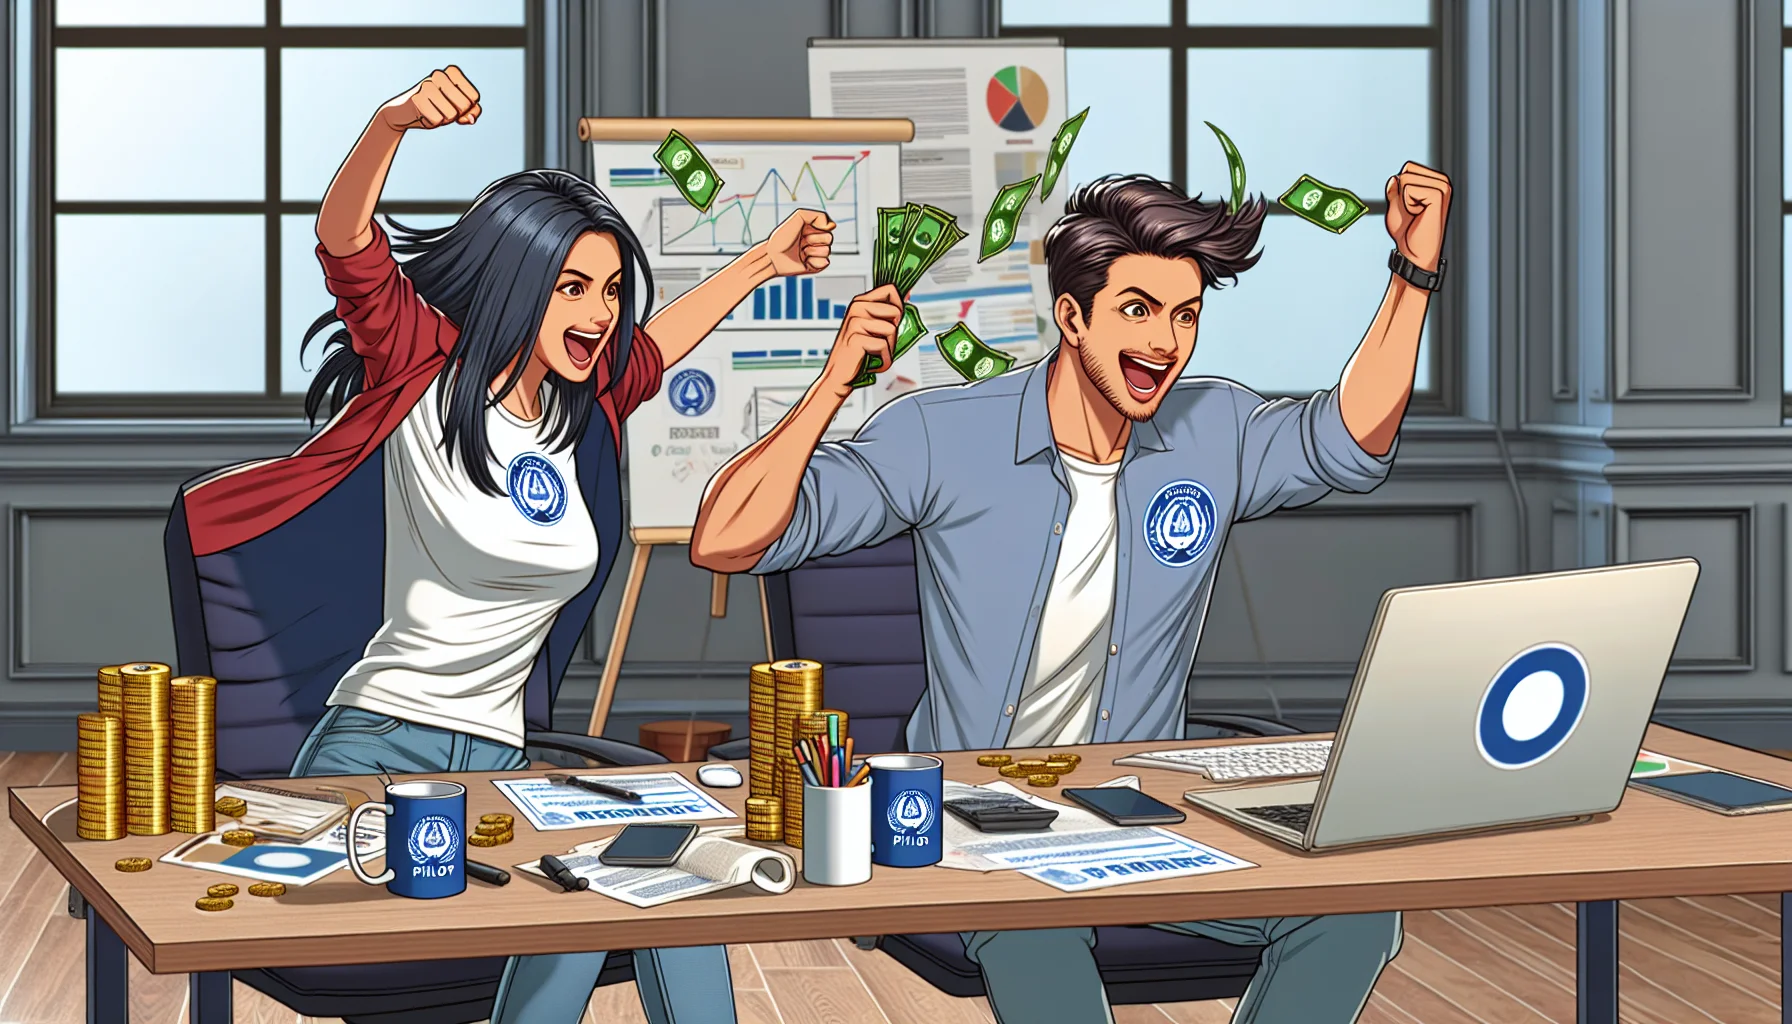 Depict an enjoyable and realistic scene where a young woman of South Asian descent and a man of Middle Eastern descent are energetically engaging in an online money-making scheme. They are in a modern office setup with computers, papers, and a white board where strategizing is visual. Include some promotional items like mugs, t-shirts, and pens scattered throughout the scene, all bearing the emblem of a fictitious 'Philo Affiliate' company. The atmosphere is lighthearted and jovial, and both individuals appear thrilled as they celebrate considerable profits on their computer screens.